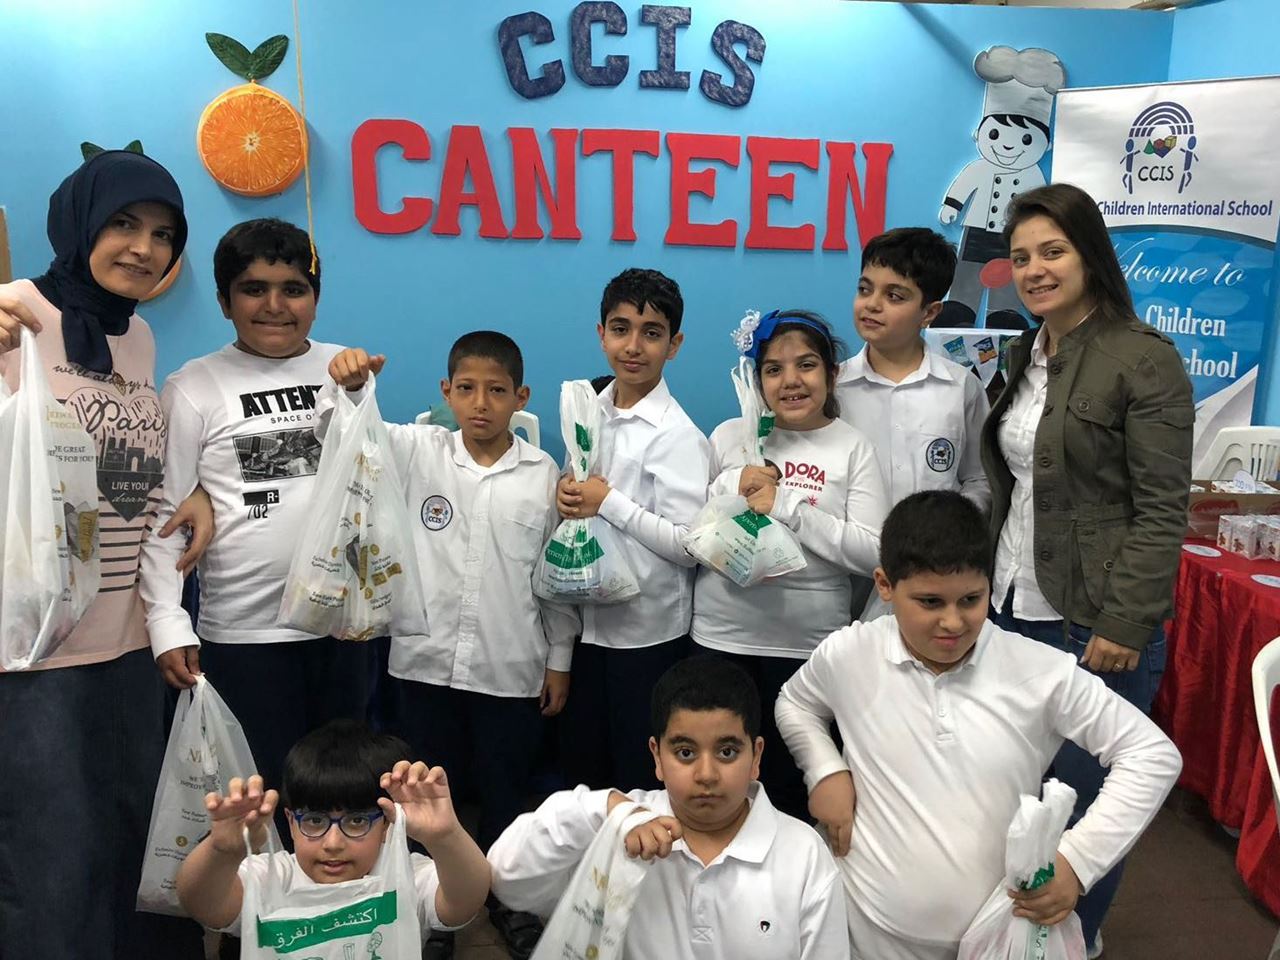 TSC Hosted Creative Children International School (CCIS) Students in Real-life Shopping Experience